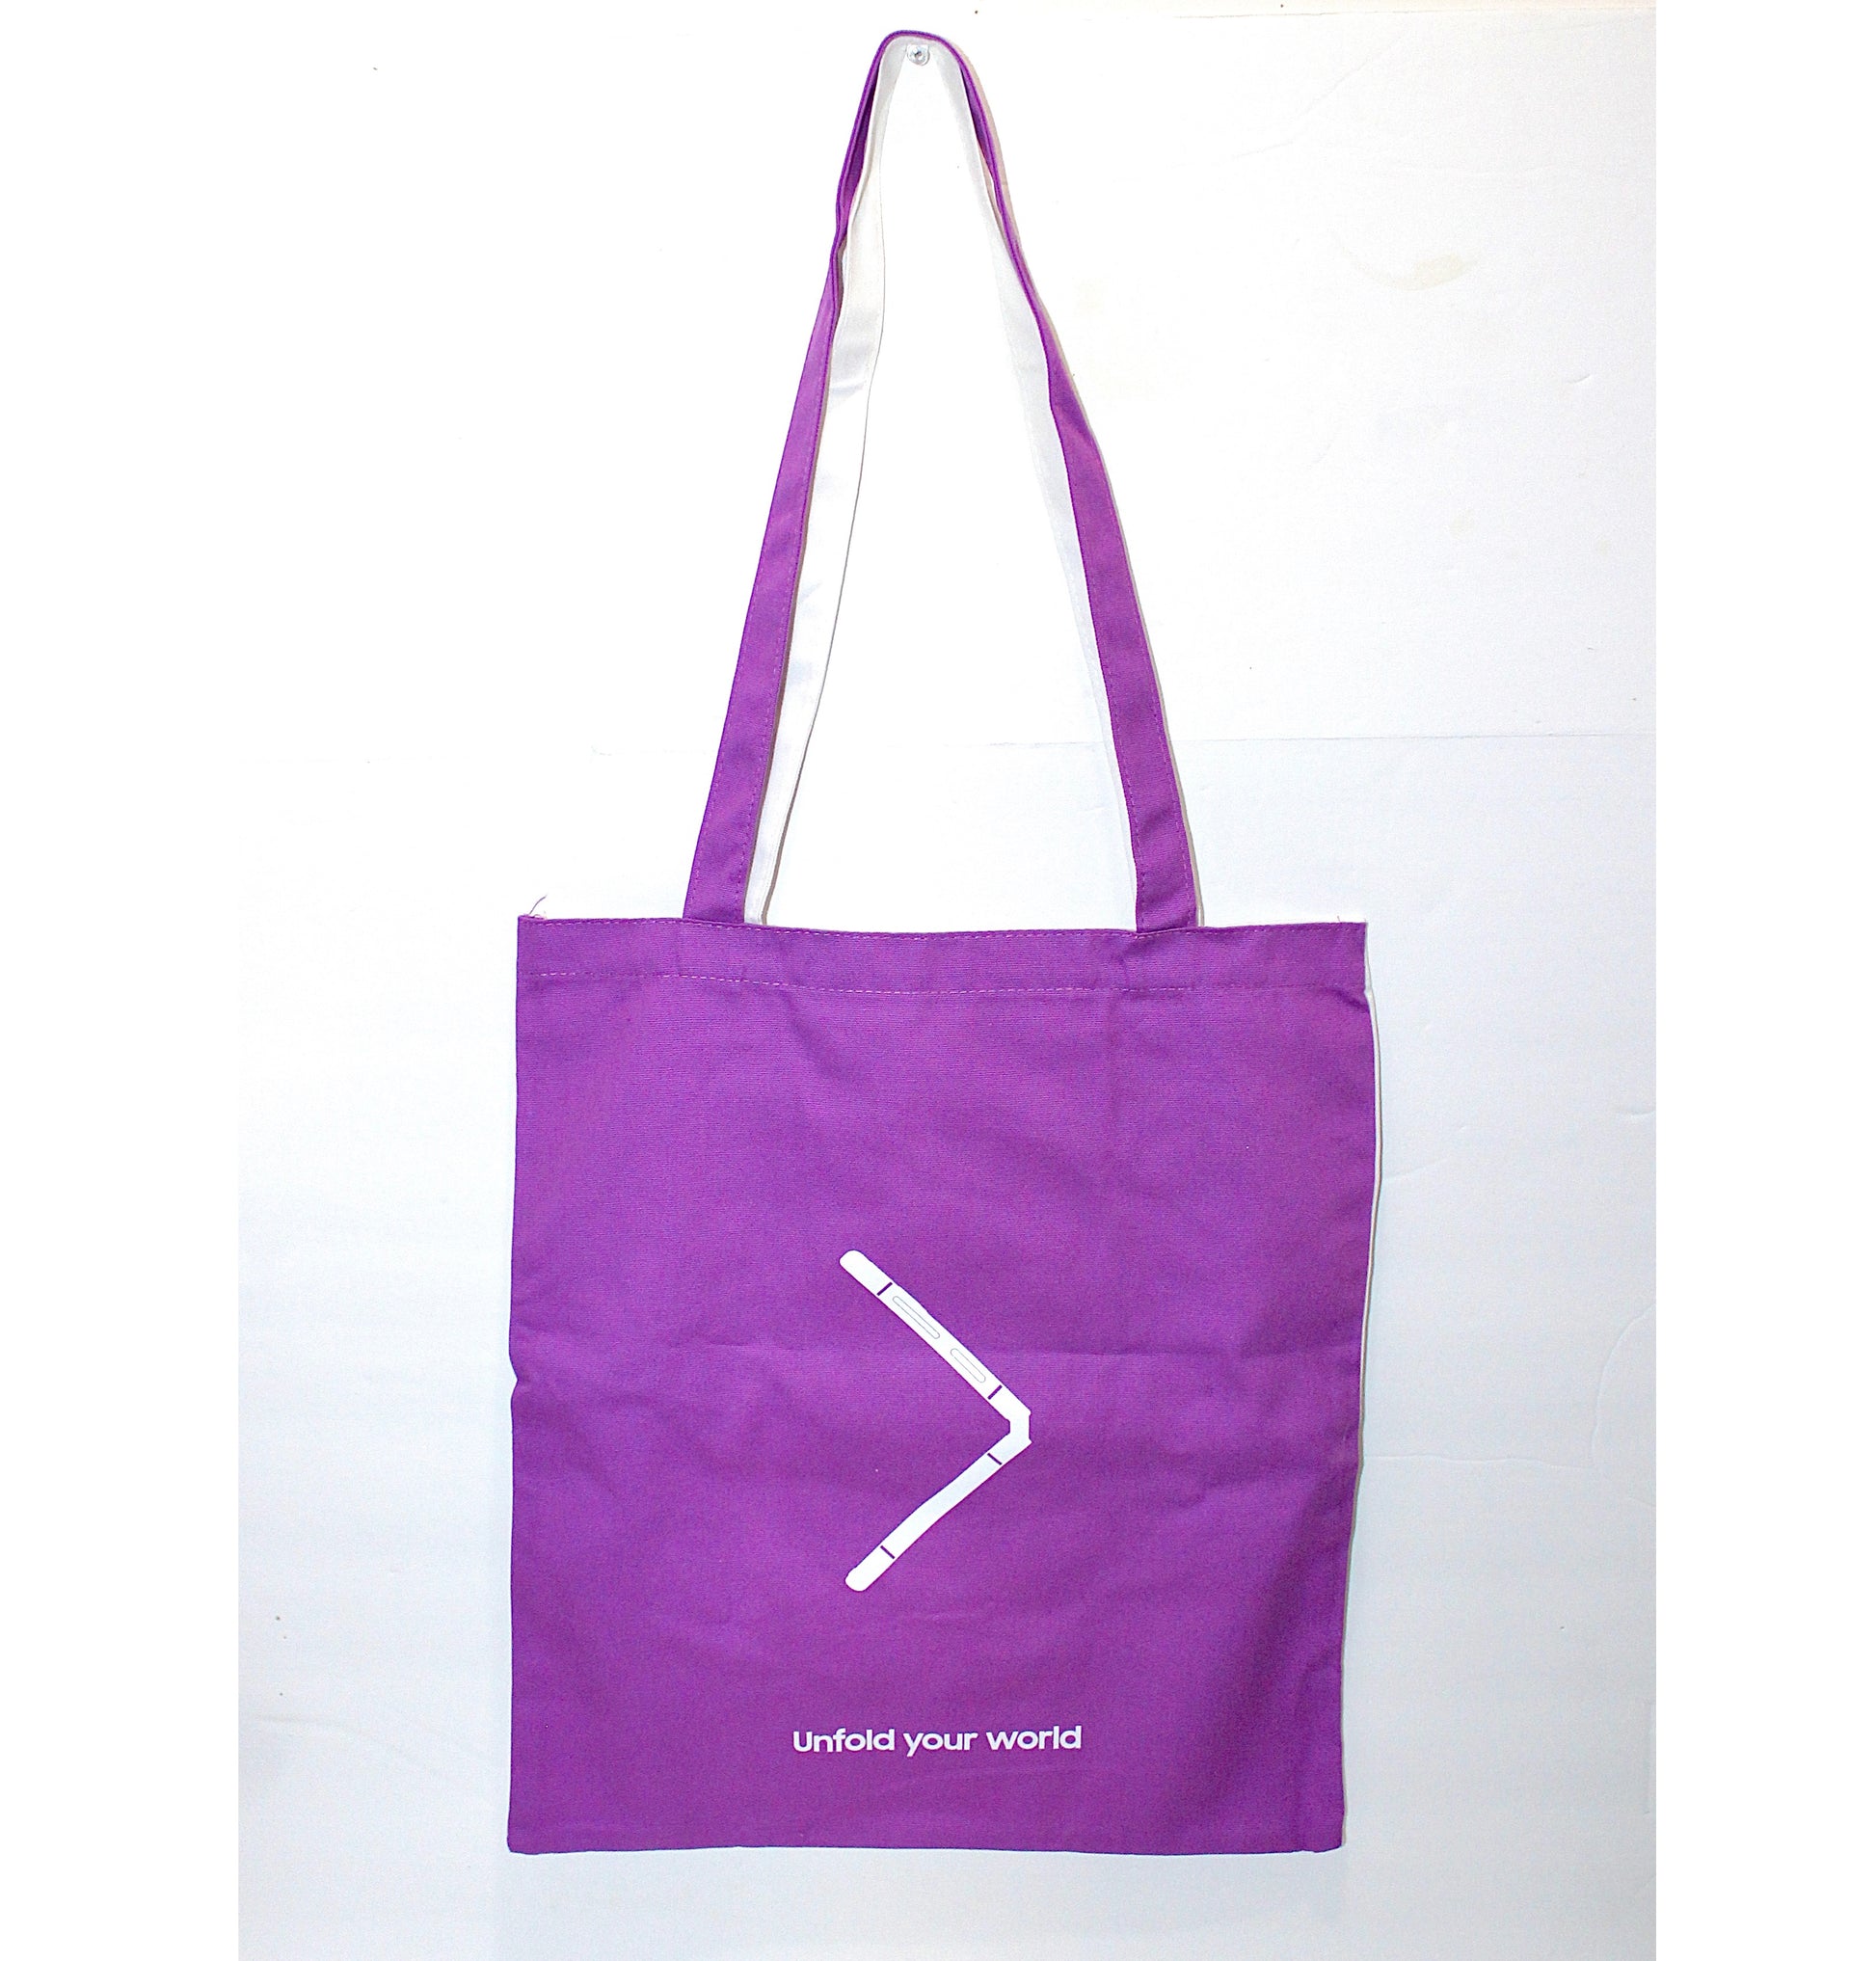 BTS Galaxy Tote Bags for Women